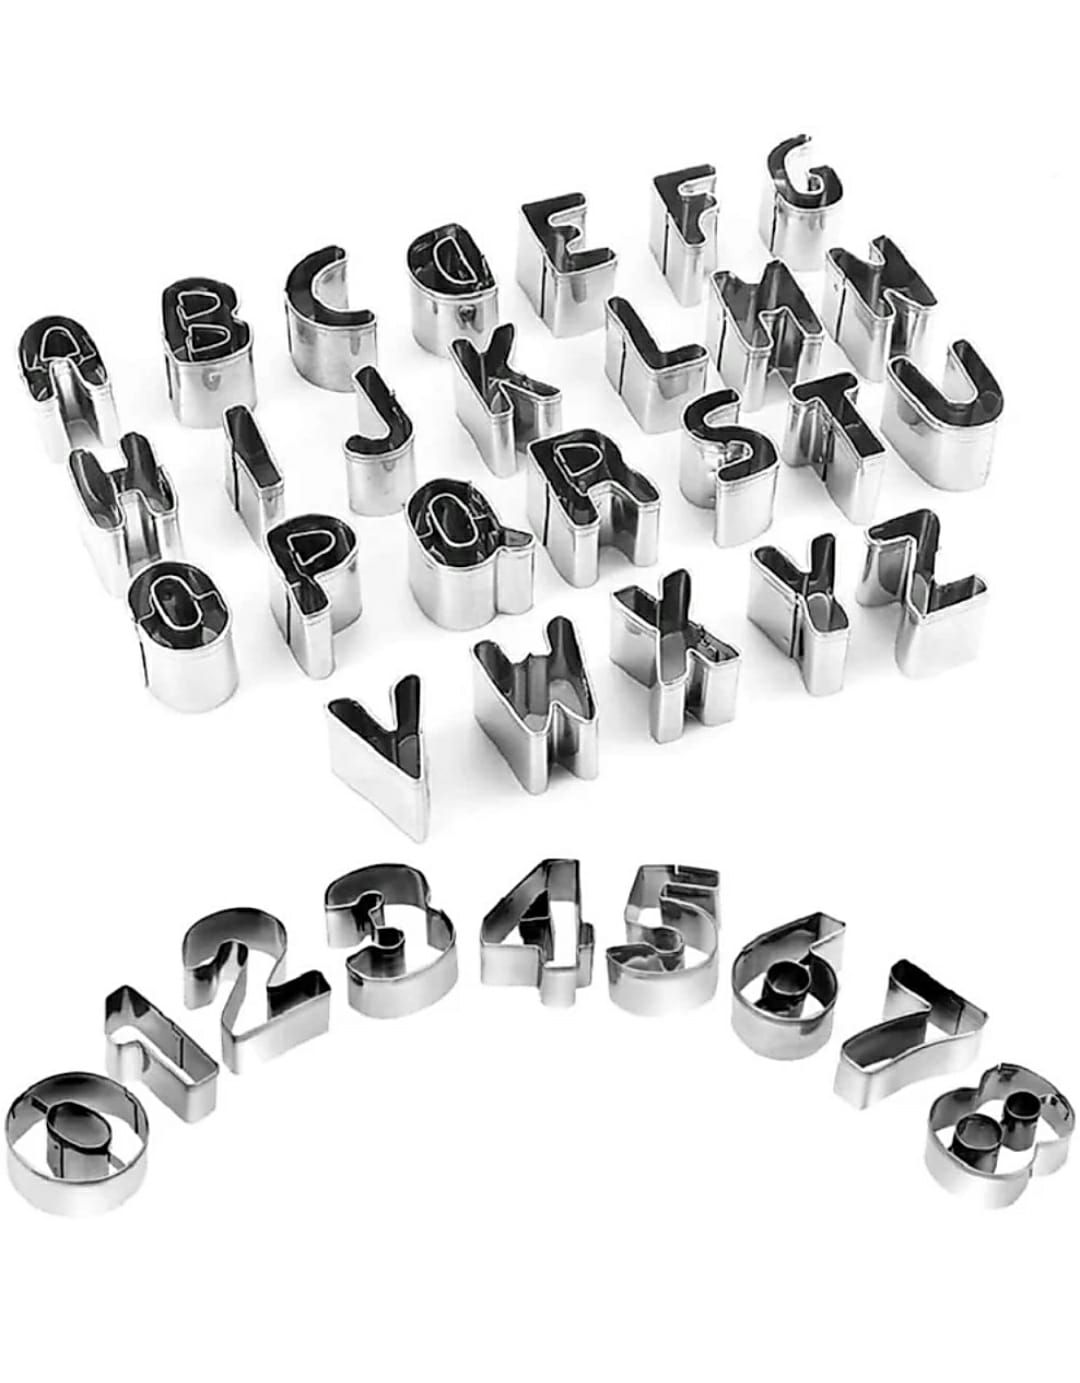 Kpa Remi Stainless Steel Alphabet and Numbers Cookie Cutters A-Z & 0-9, - 36piece Pack